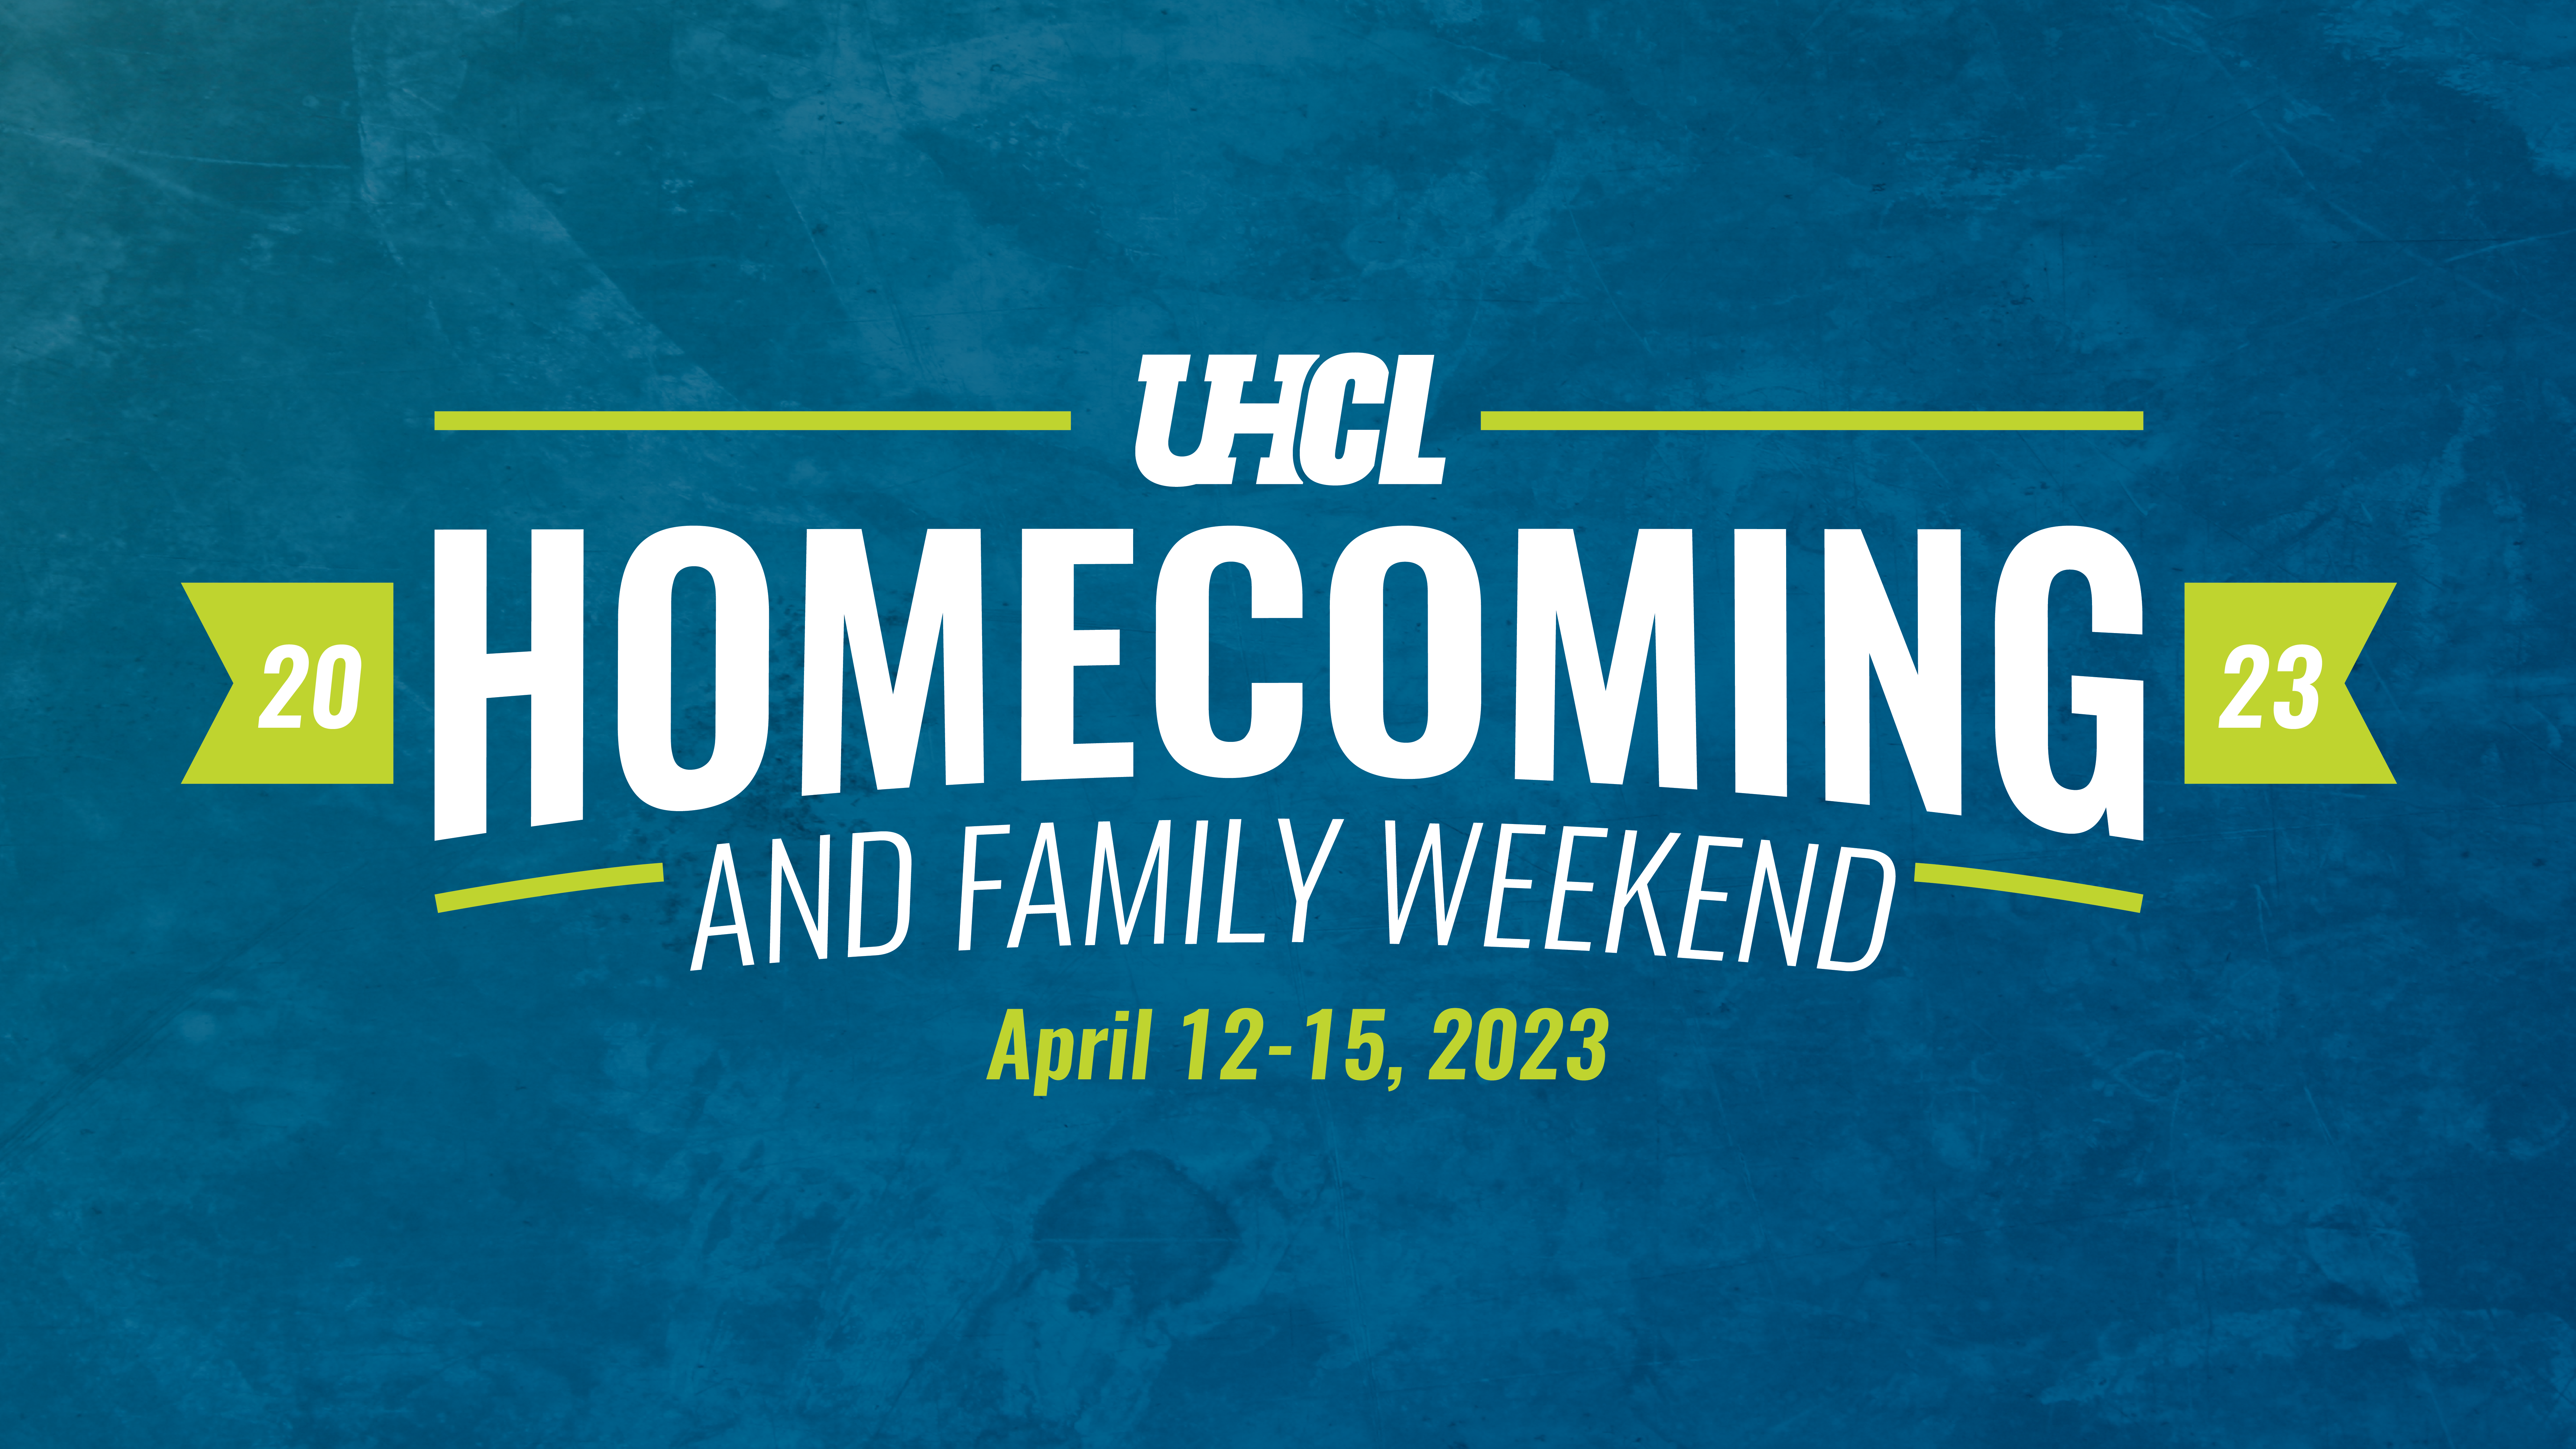 2023 UHCL Homecoming and Family Weekend April 12-15